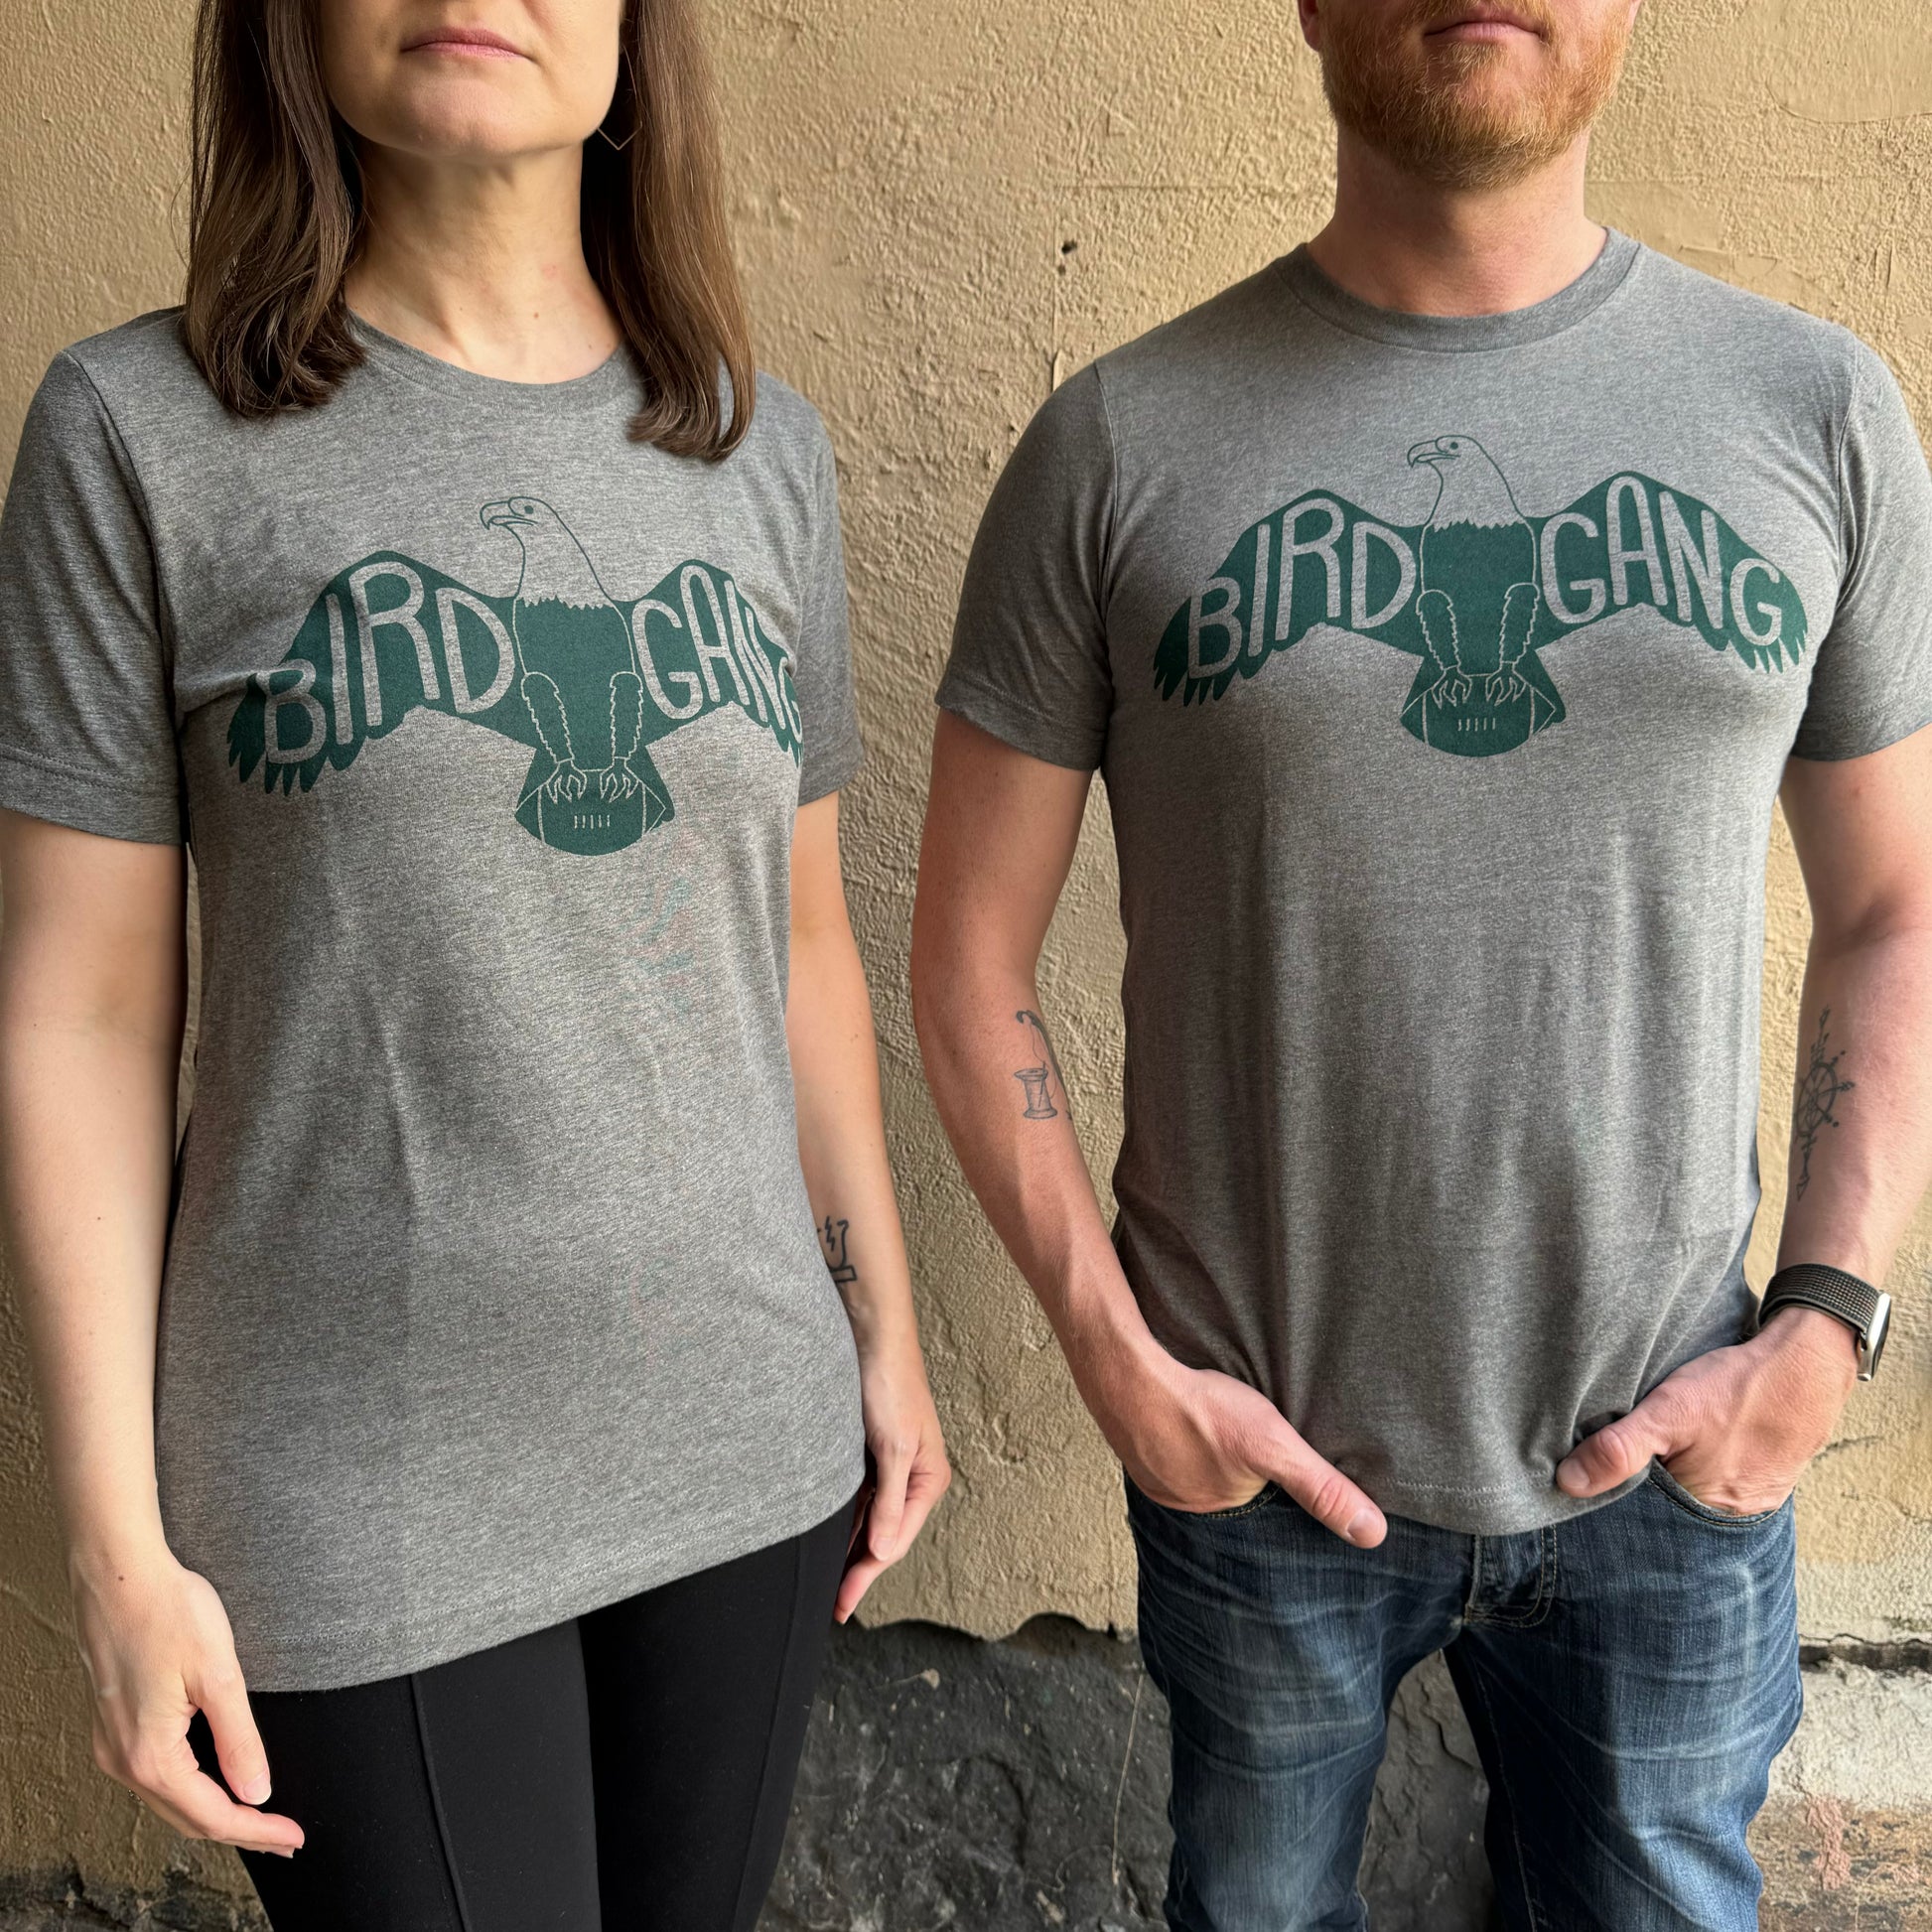 Two people stand against a beige wall wearing matching grey Bird Gang T-Shirts with an eagle graphic and the text "Philly’s Bird Gang." The unisex exit343design t-shirts fit them well. The person on the left has longer hair; the one on the right has a beard and crossed arms.